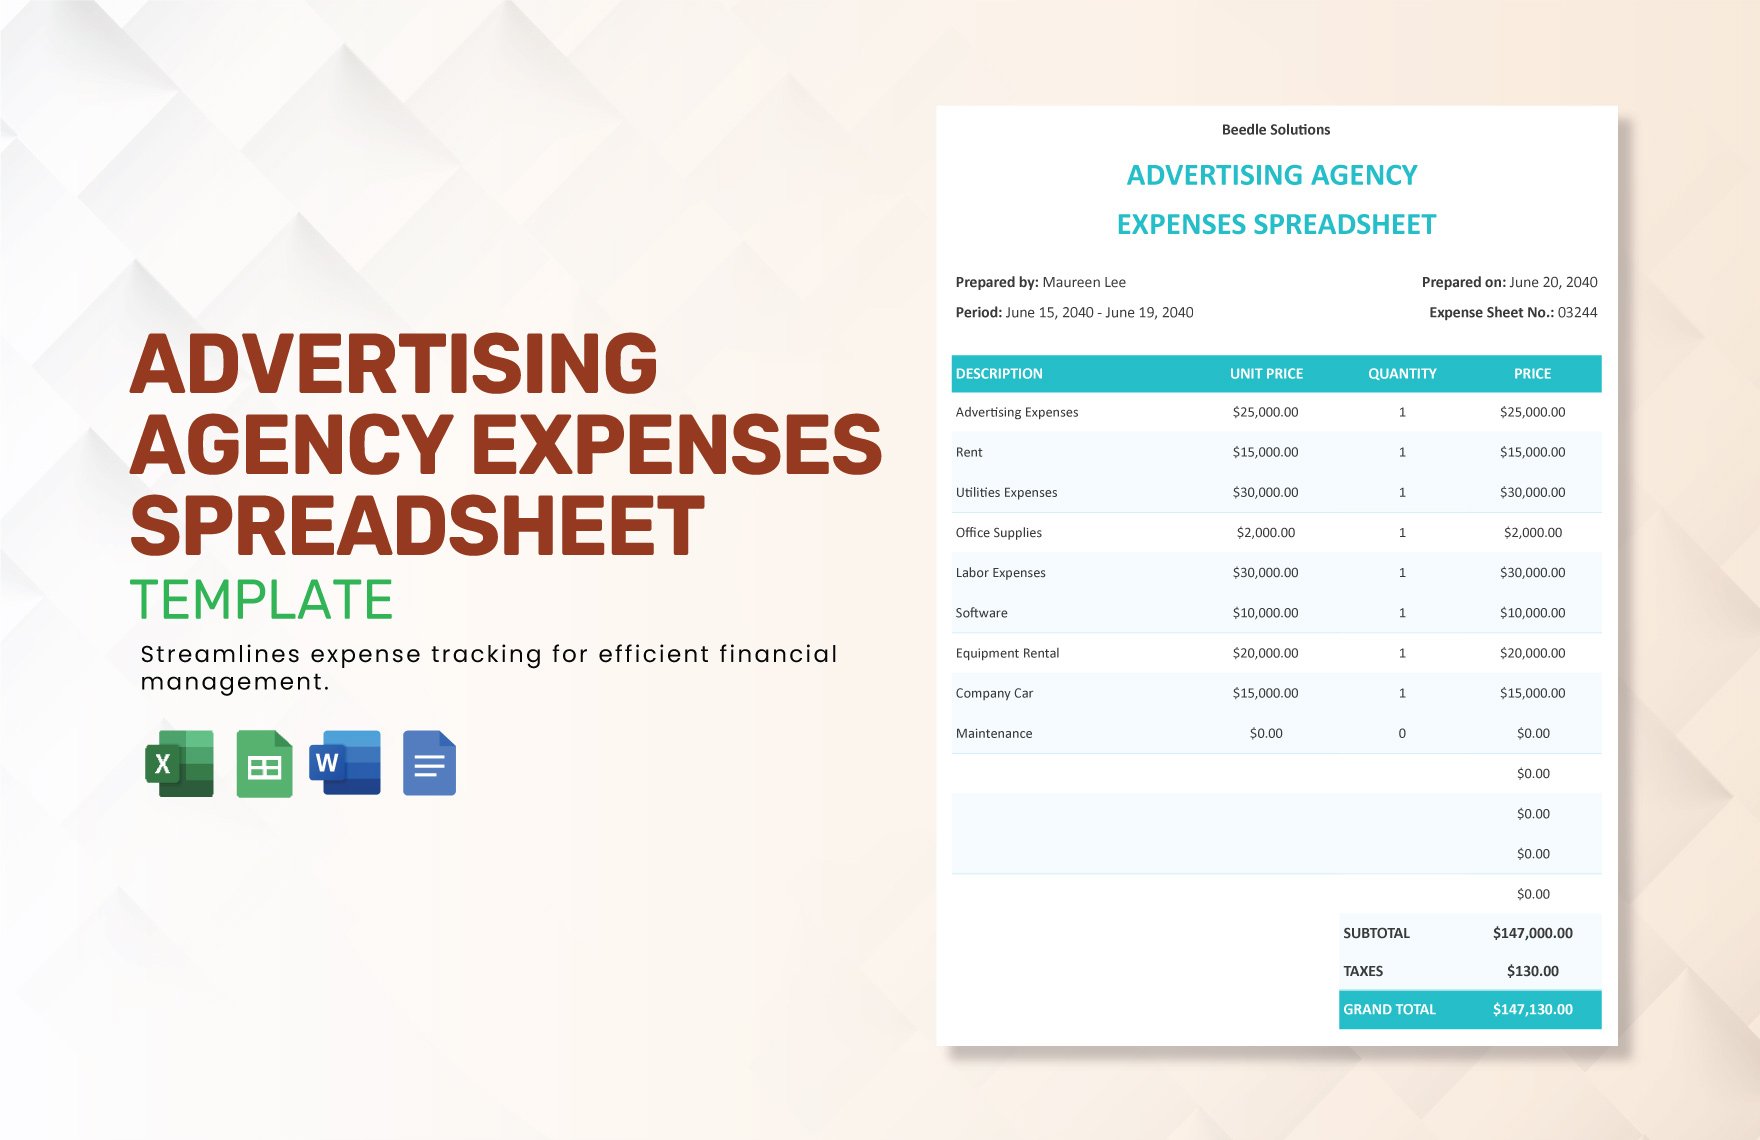 Free Advertising Agency Expenses Spreadsheet Template in Word, Google Docs, Excel, Google Sheets